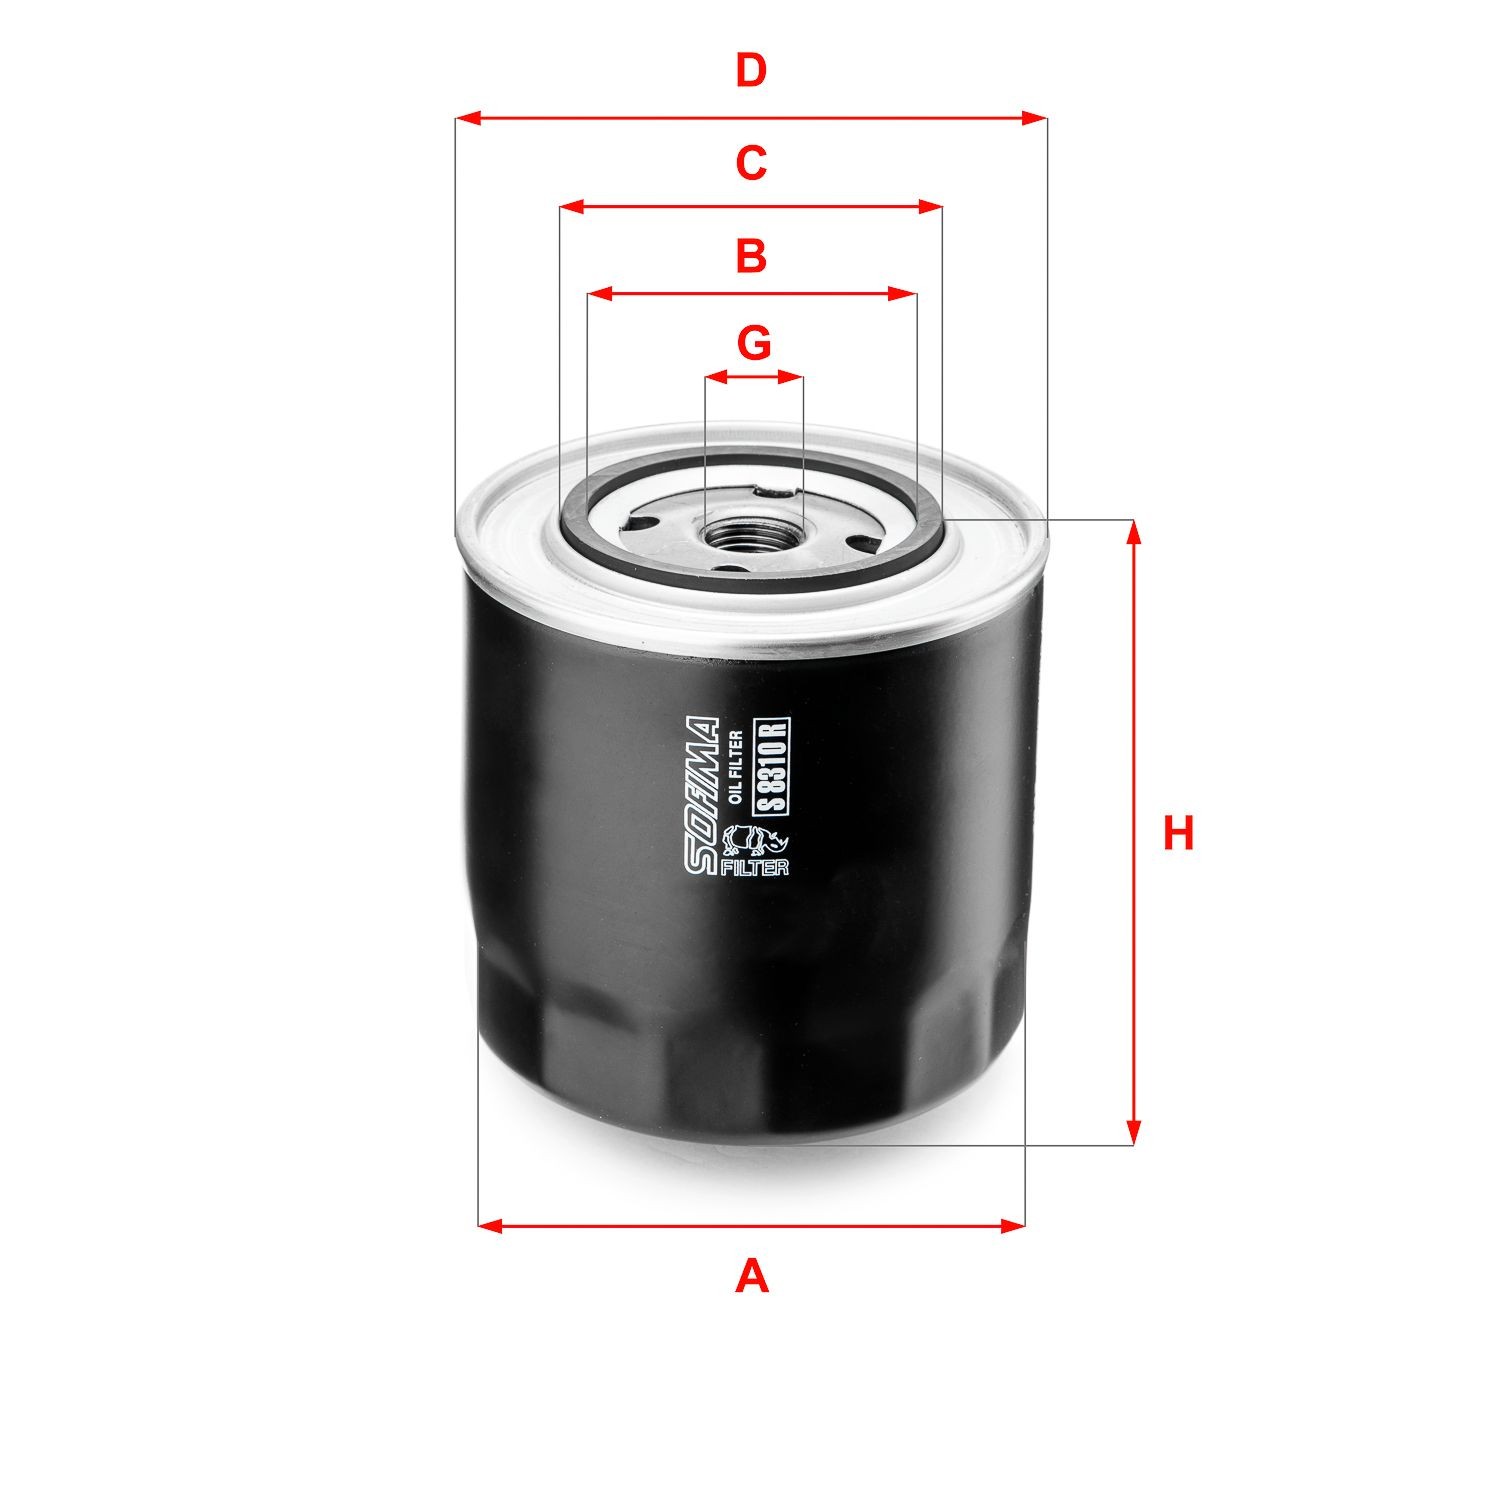 SOFIMA S 8310 R Oil filter 3/4-16 UNF, with one anti-return valve, Spin-on Filter